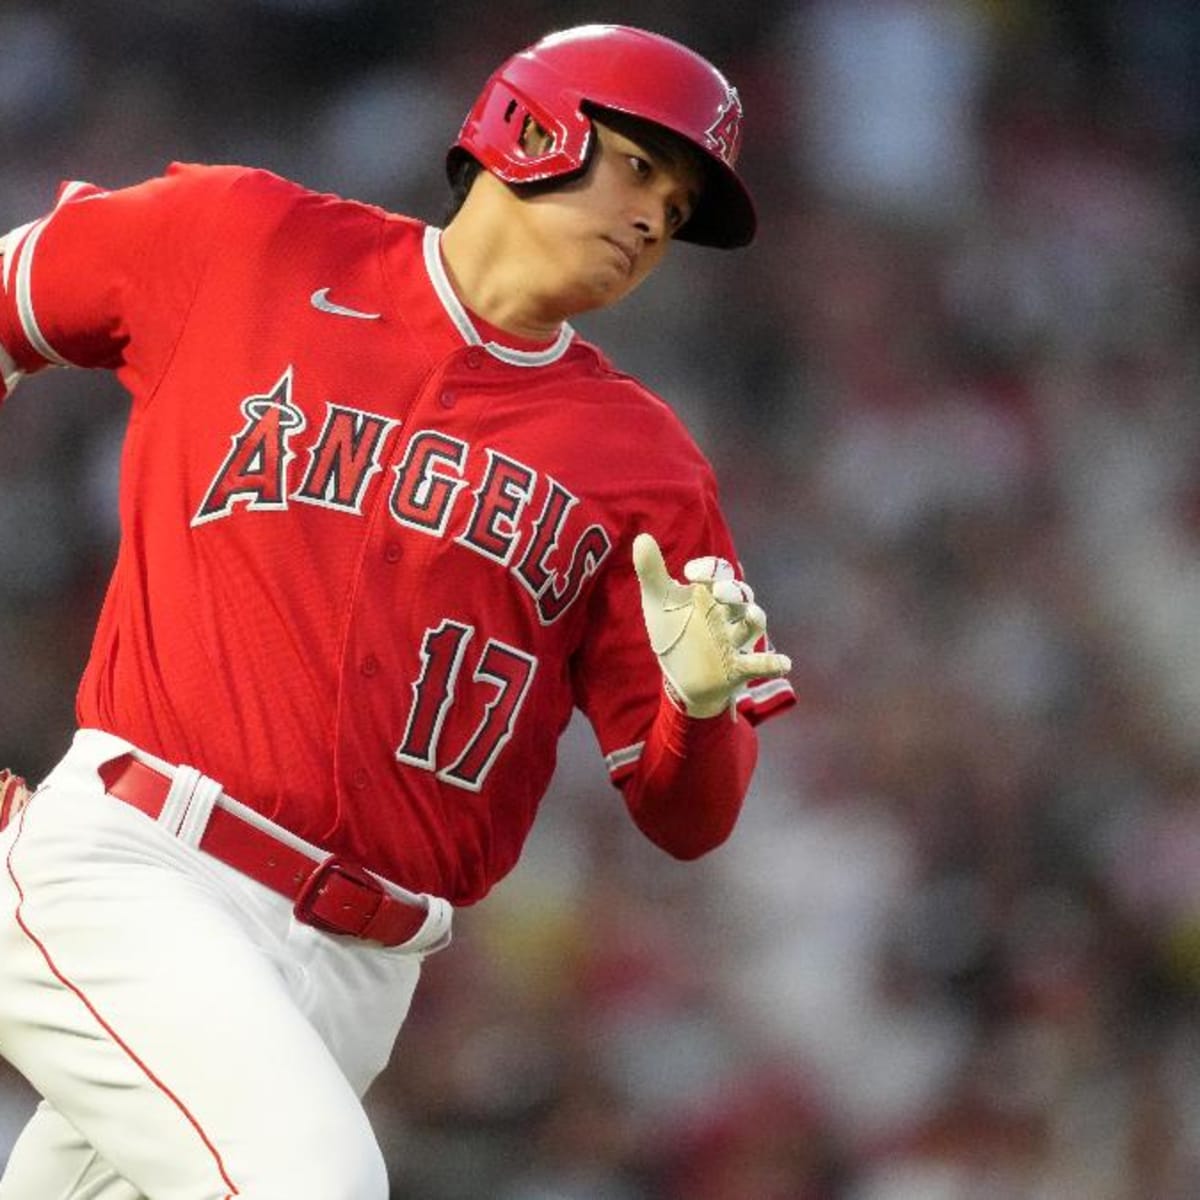 MLB teams find new ways to celebrate. Angels, Red Sox have best.